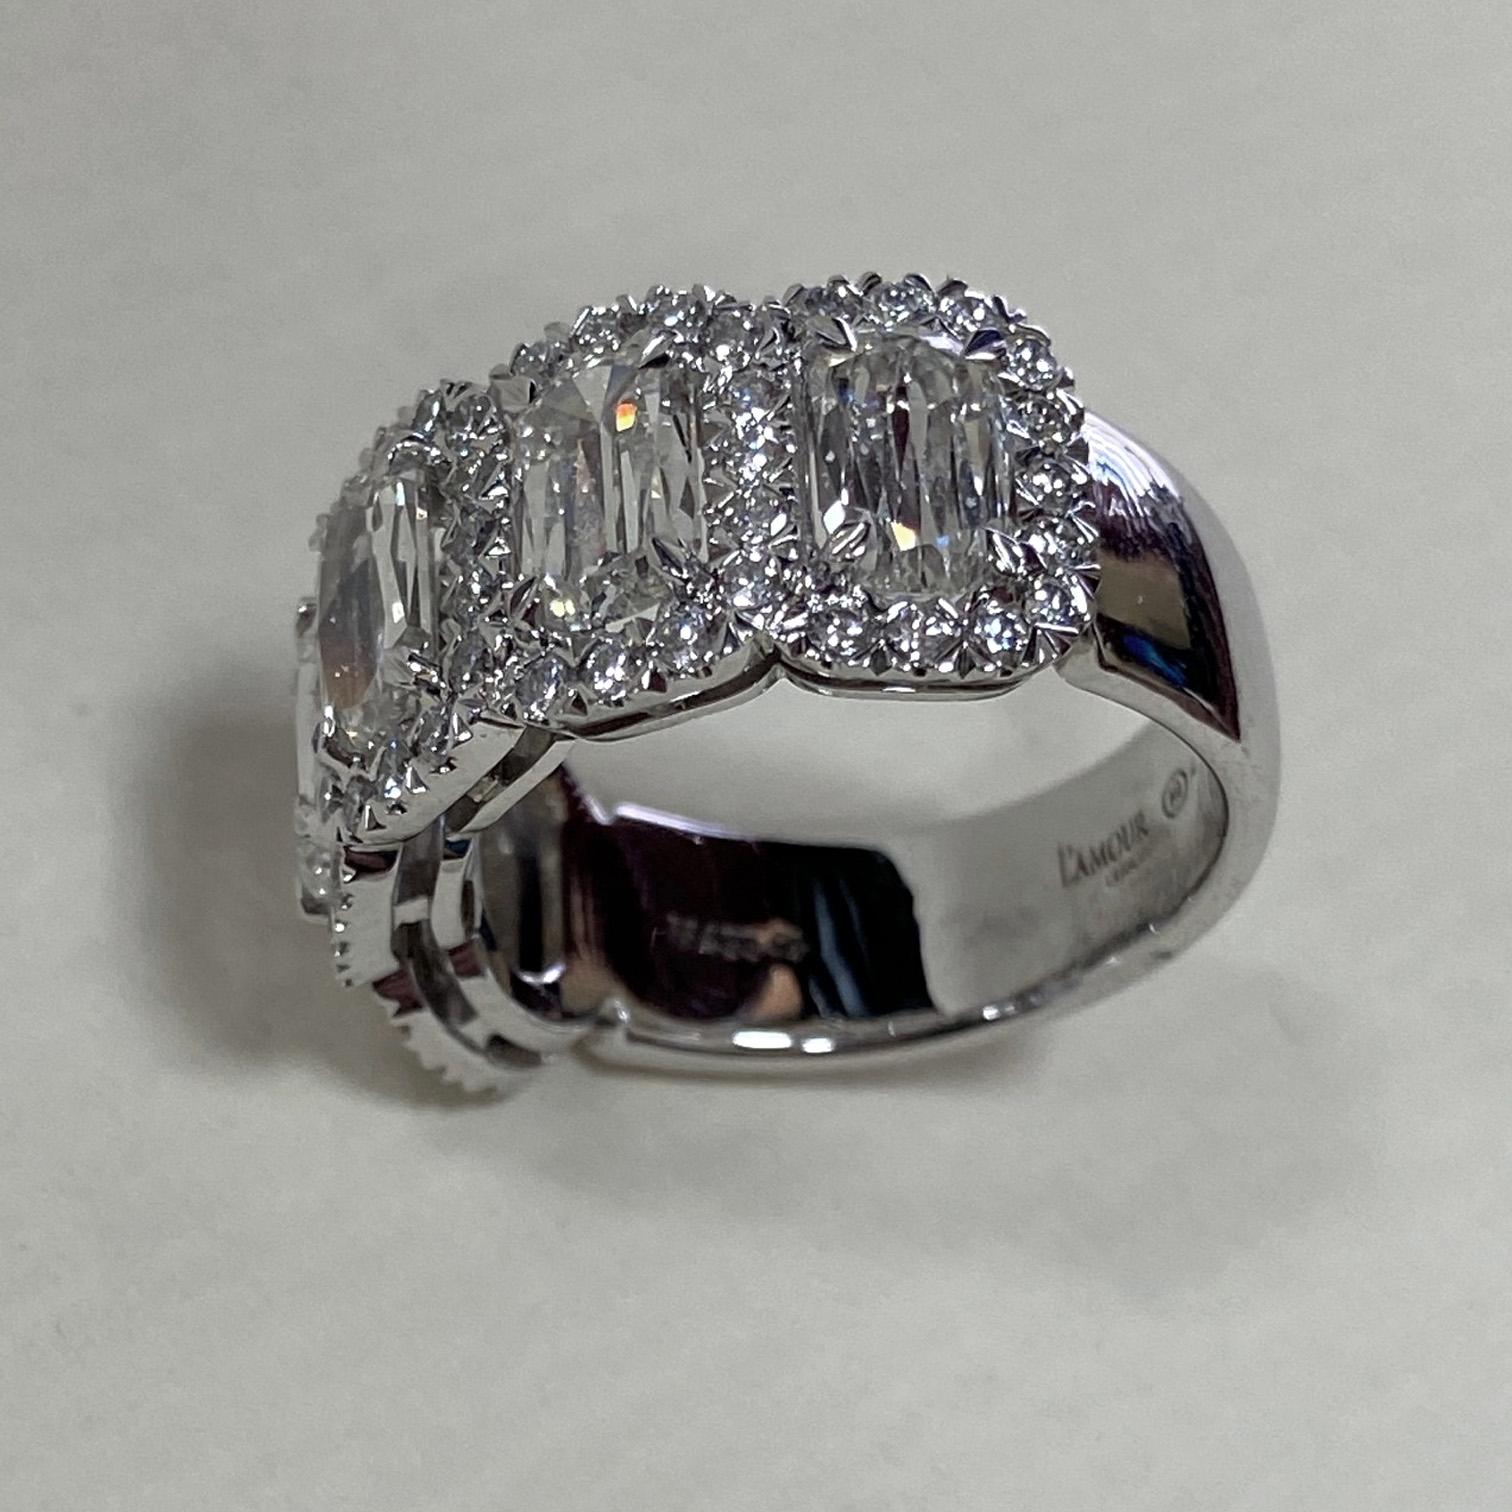 From Christopher Designs in New York, this beautiful 18 karat white gold diamond band showcases five of the designers signature L'amour crisscut, E color, VS clarity, diamonds totaling 2.66 total carats. Adorning the stations are halos of G color,